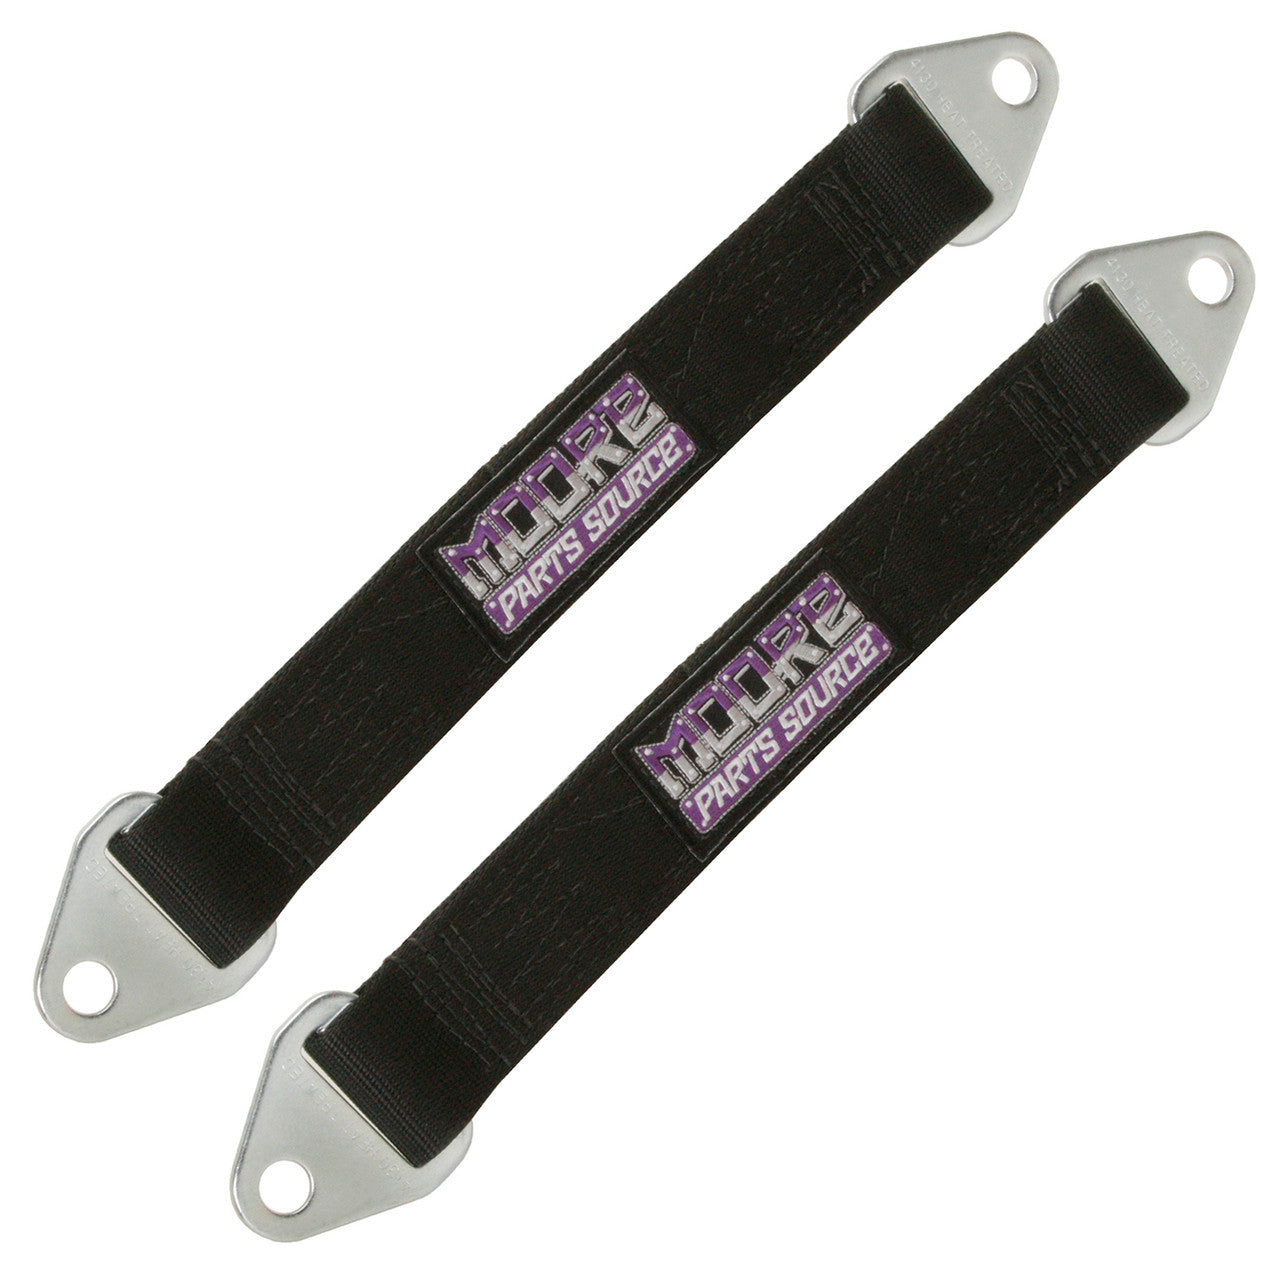 26 Inch USA Made Off-Road Suspension Limit Straps, Sold As Pair